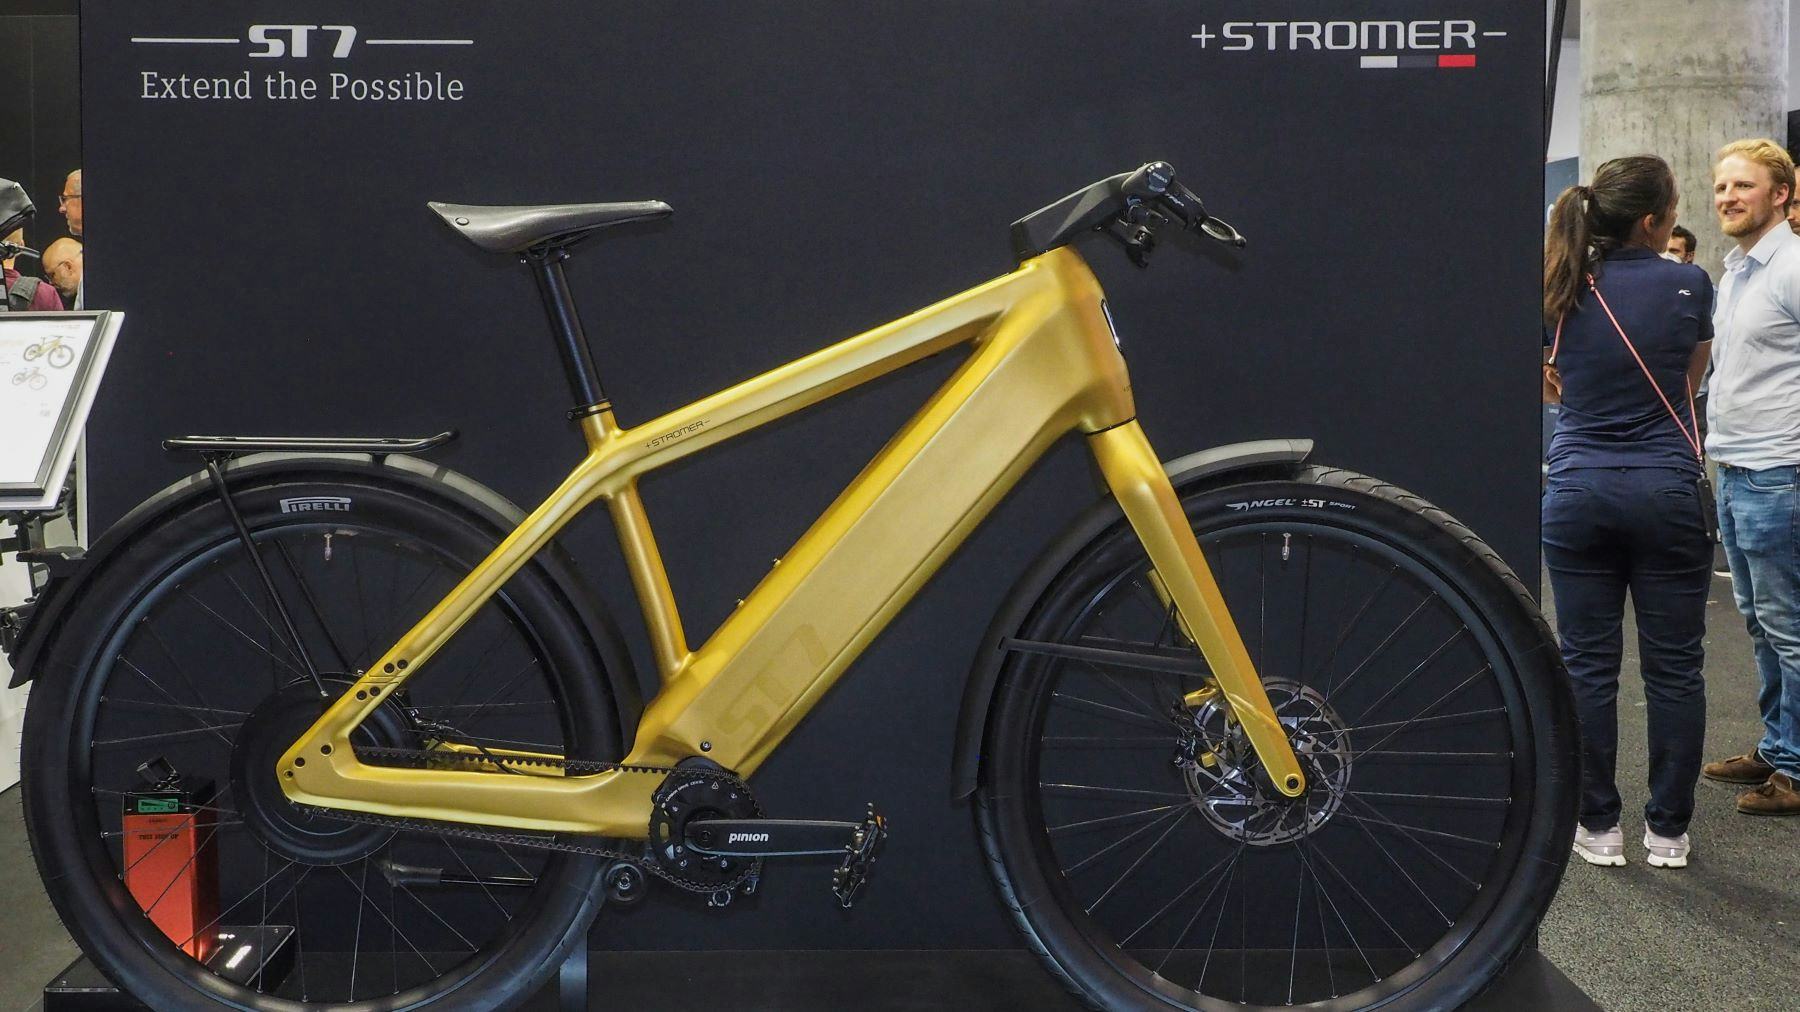 The ‘golden’ launch edition of Stromer’s ST7 at Eurobike. – Photos Peter Hummel